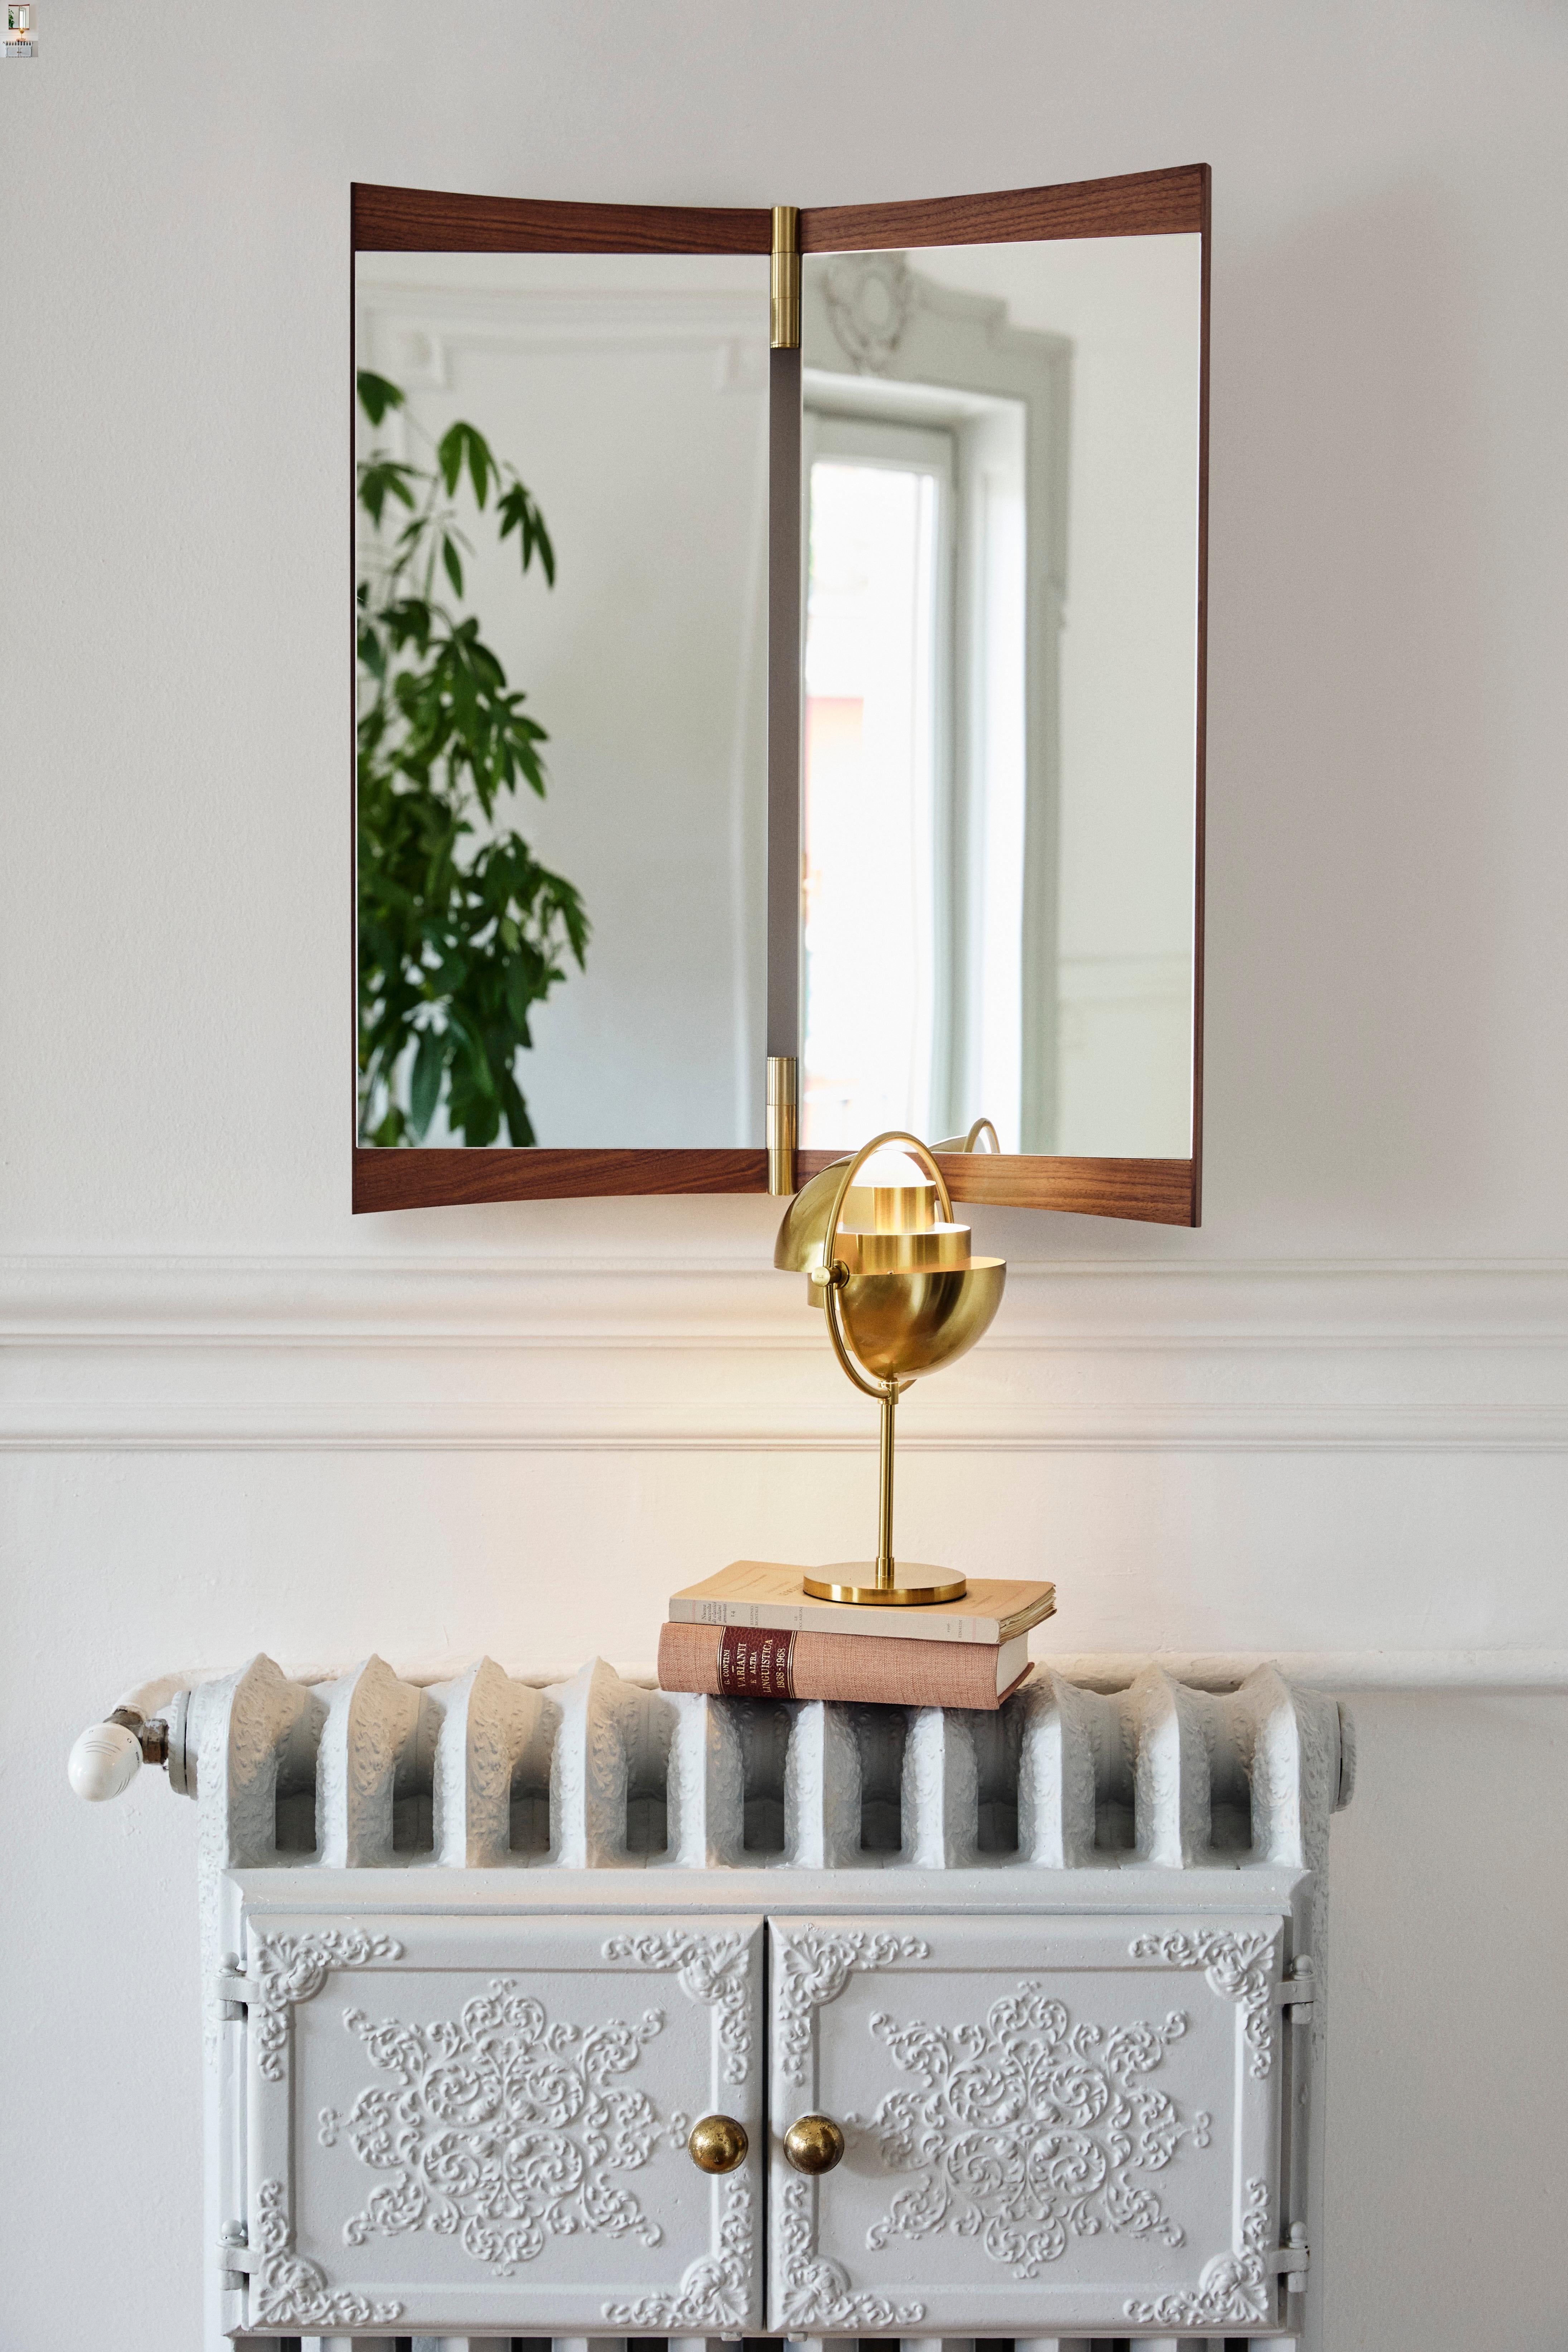 GamFratesi Two-Panel Vanity Mirror for GUBI.

This new collection of wall-mounted mirrors ingeniously reinvents the vanity mirror for contemporary interiors. Executed in walnut and brass, the Vanity mirror embodies GamFratesi’s ability to bring the